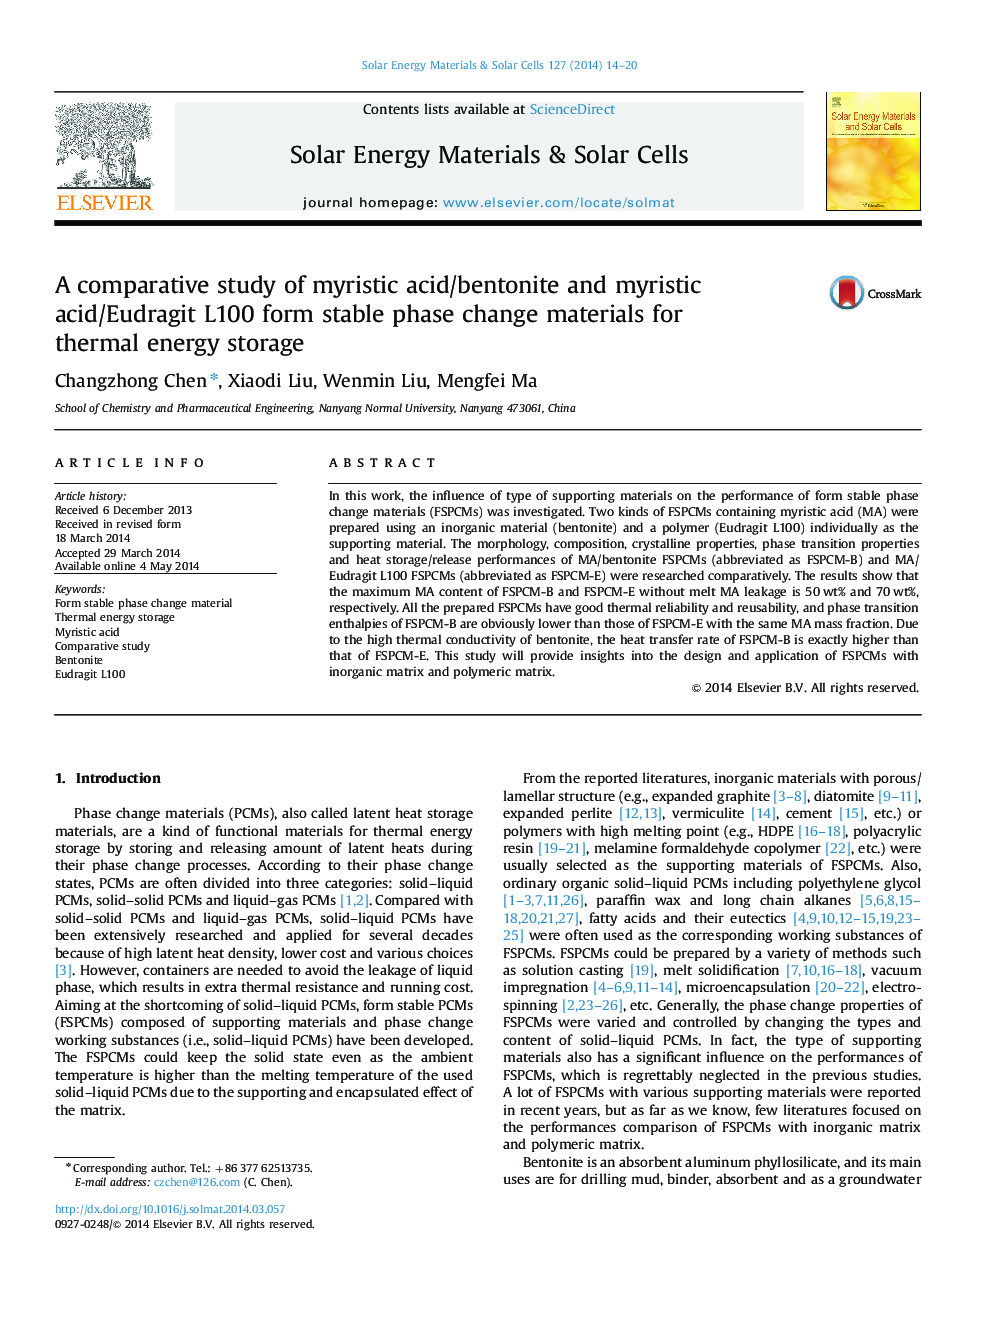 A comparative study of myristic acid/bentonite and myristic acid/Eudragit L100 form stable phase change materials for thermal energy storage